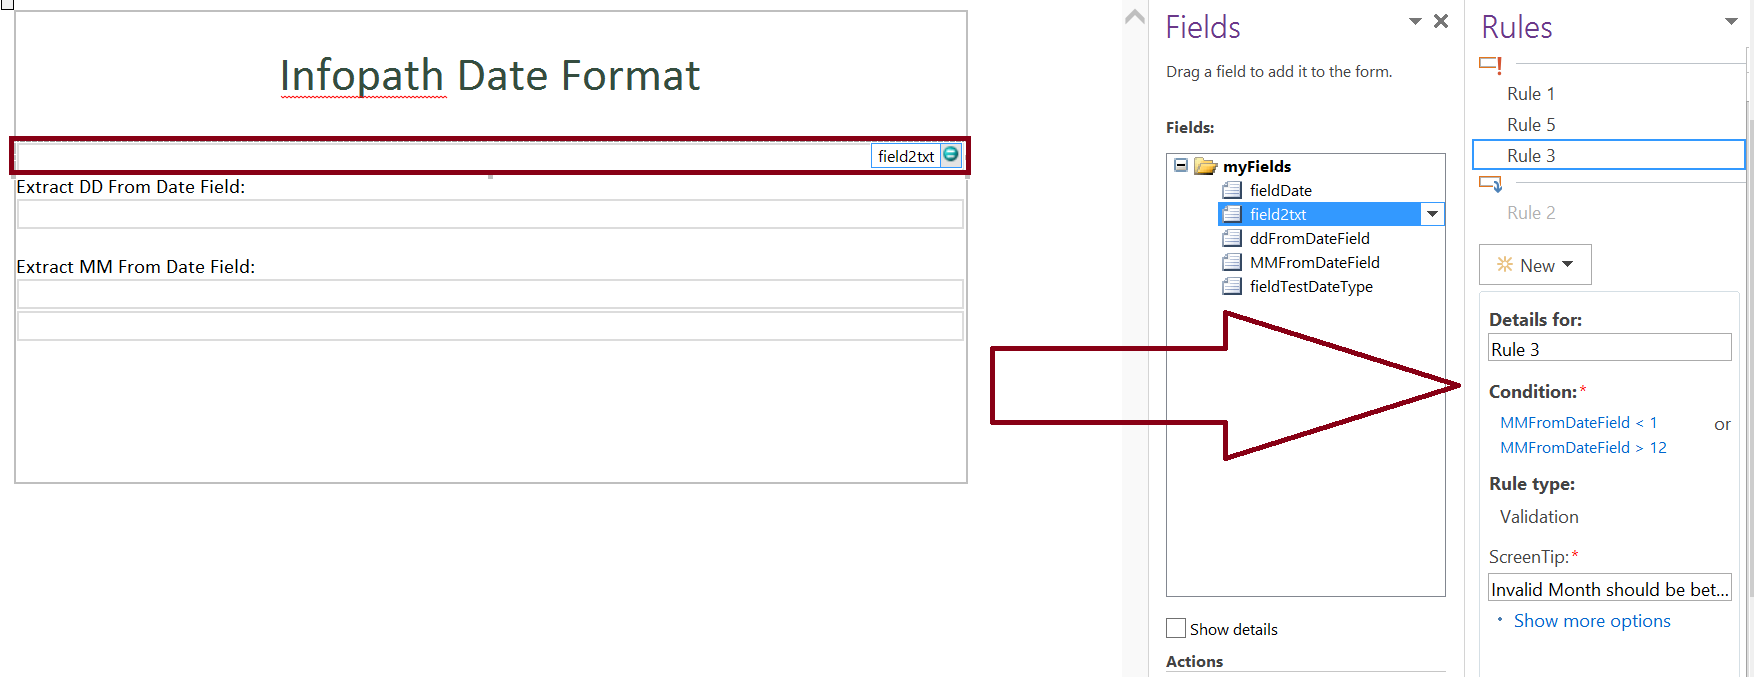 Date format validation in infopath form - month part